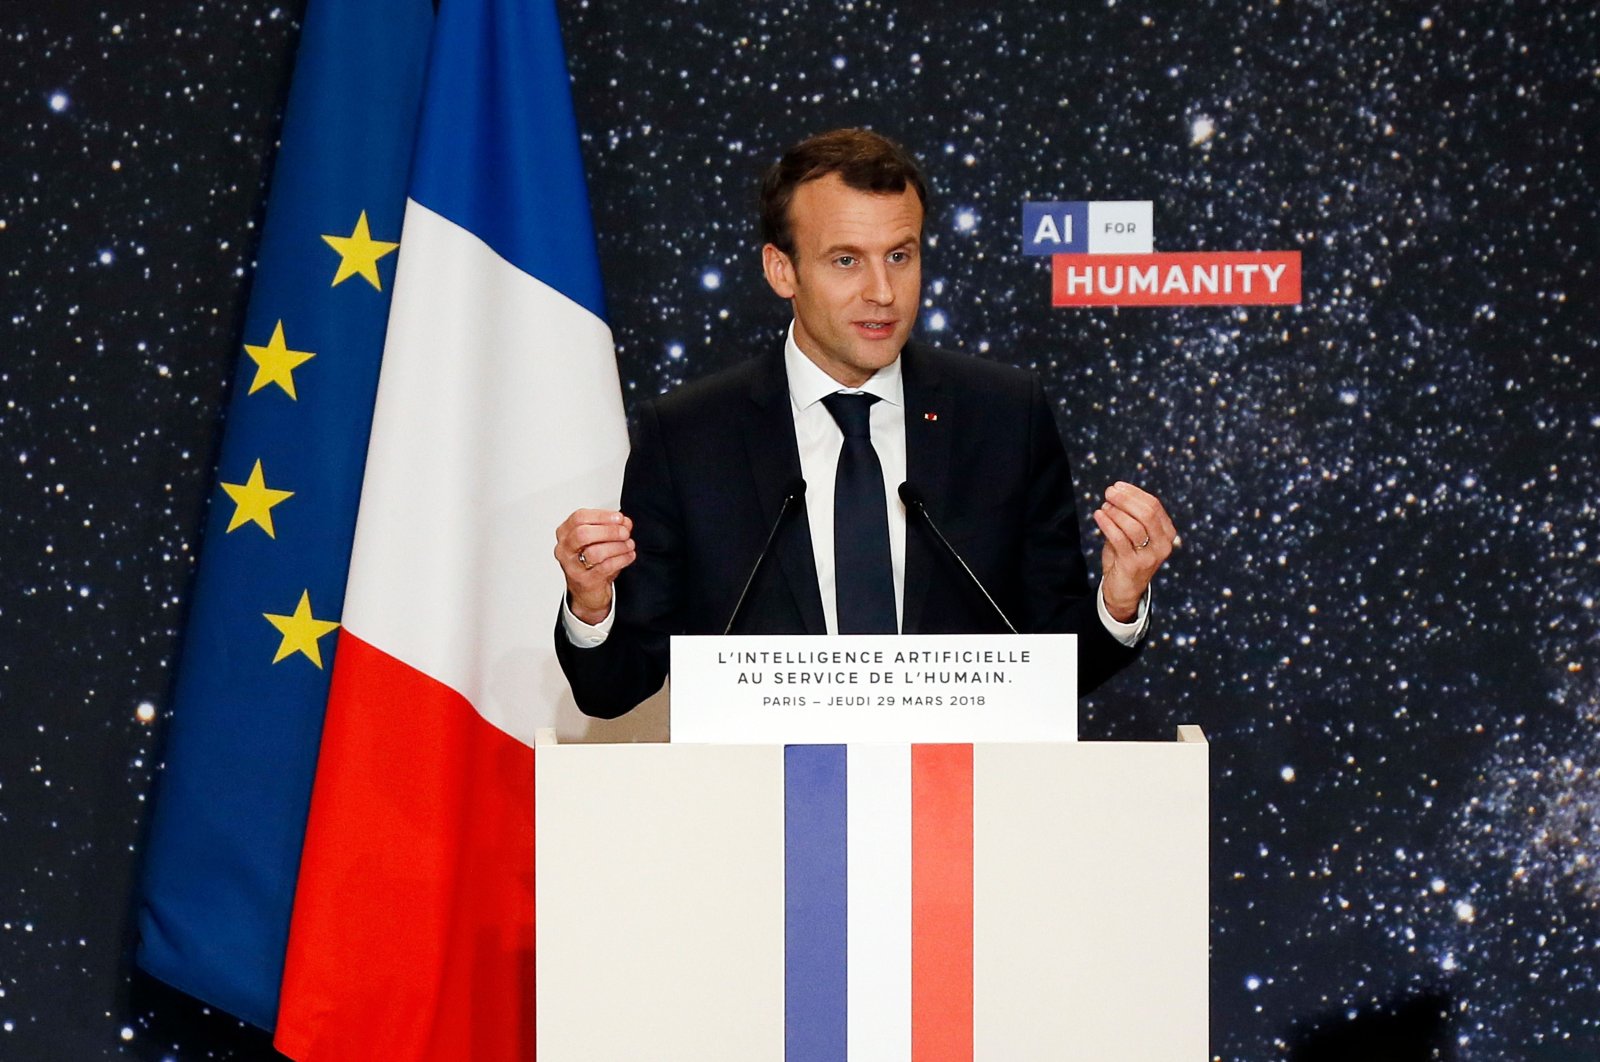 French President Emmanuel Macron gestures as he delivers a speech during the "Artificial Intelligence for Humanity" event in Paris, France, March 29, 2018. (AFP Photo)